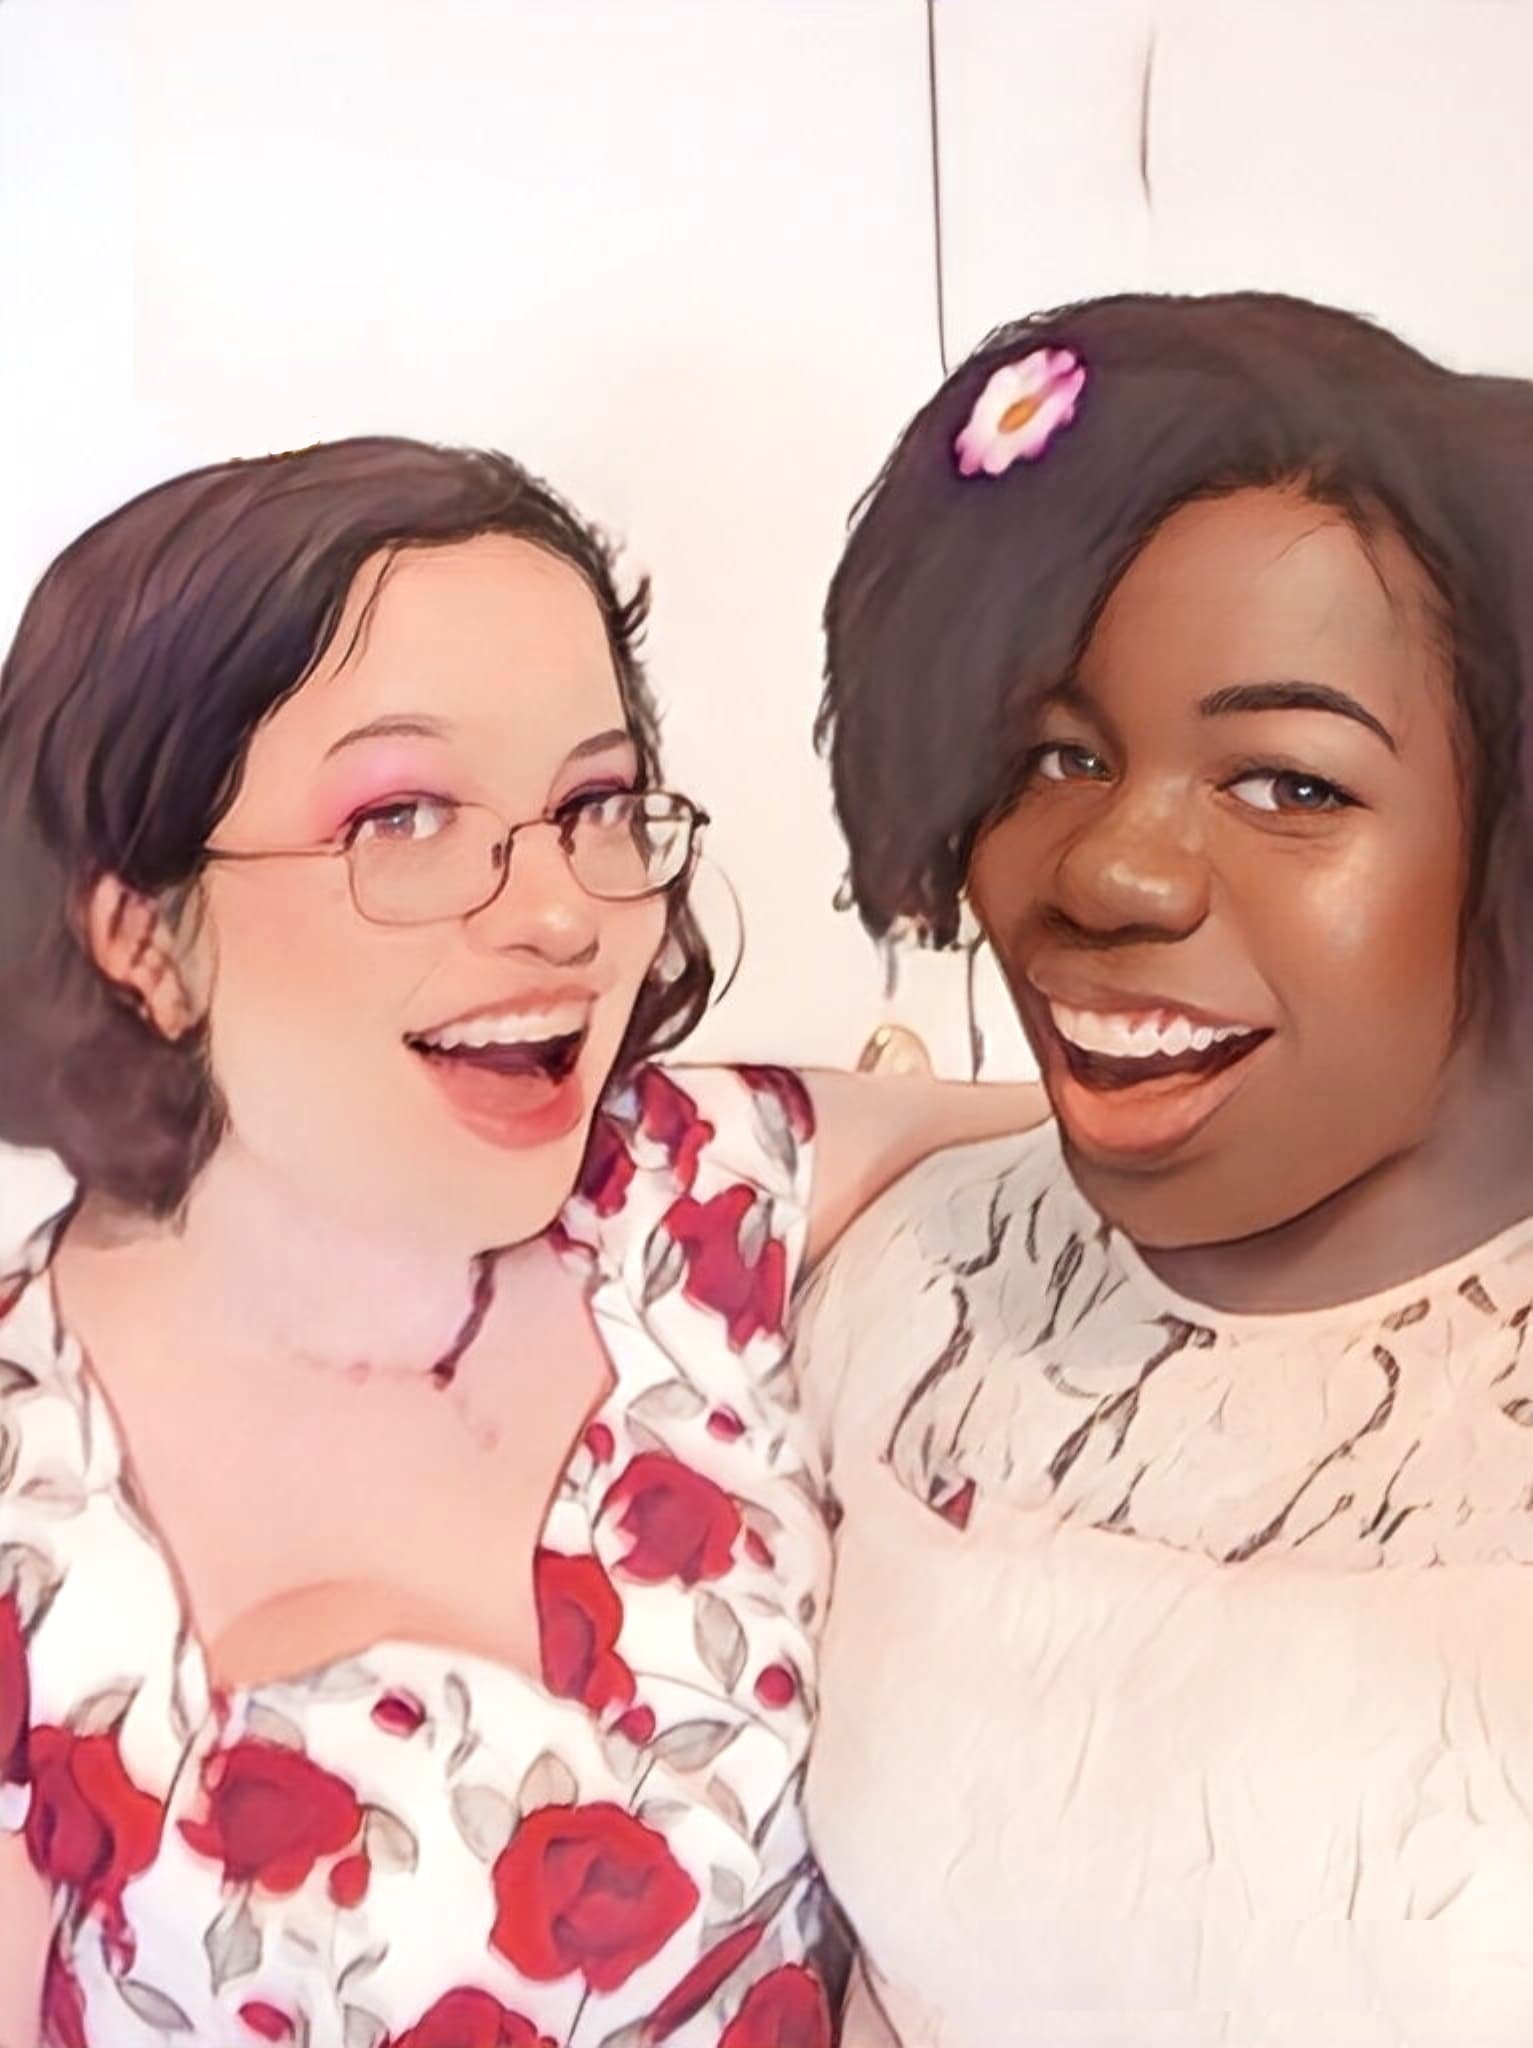  a cartoon-style image of 2 women smiling widely. The one on the left has light skin, brown eyes, and hair, and is wearing glasses, a necklace with red jewels on it, and a white dress with red flowers and green leaves on it. The one on the right has 